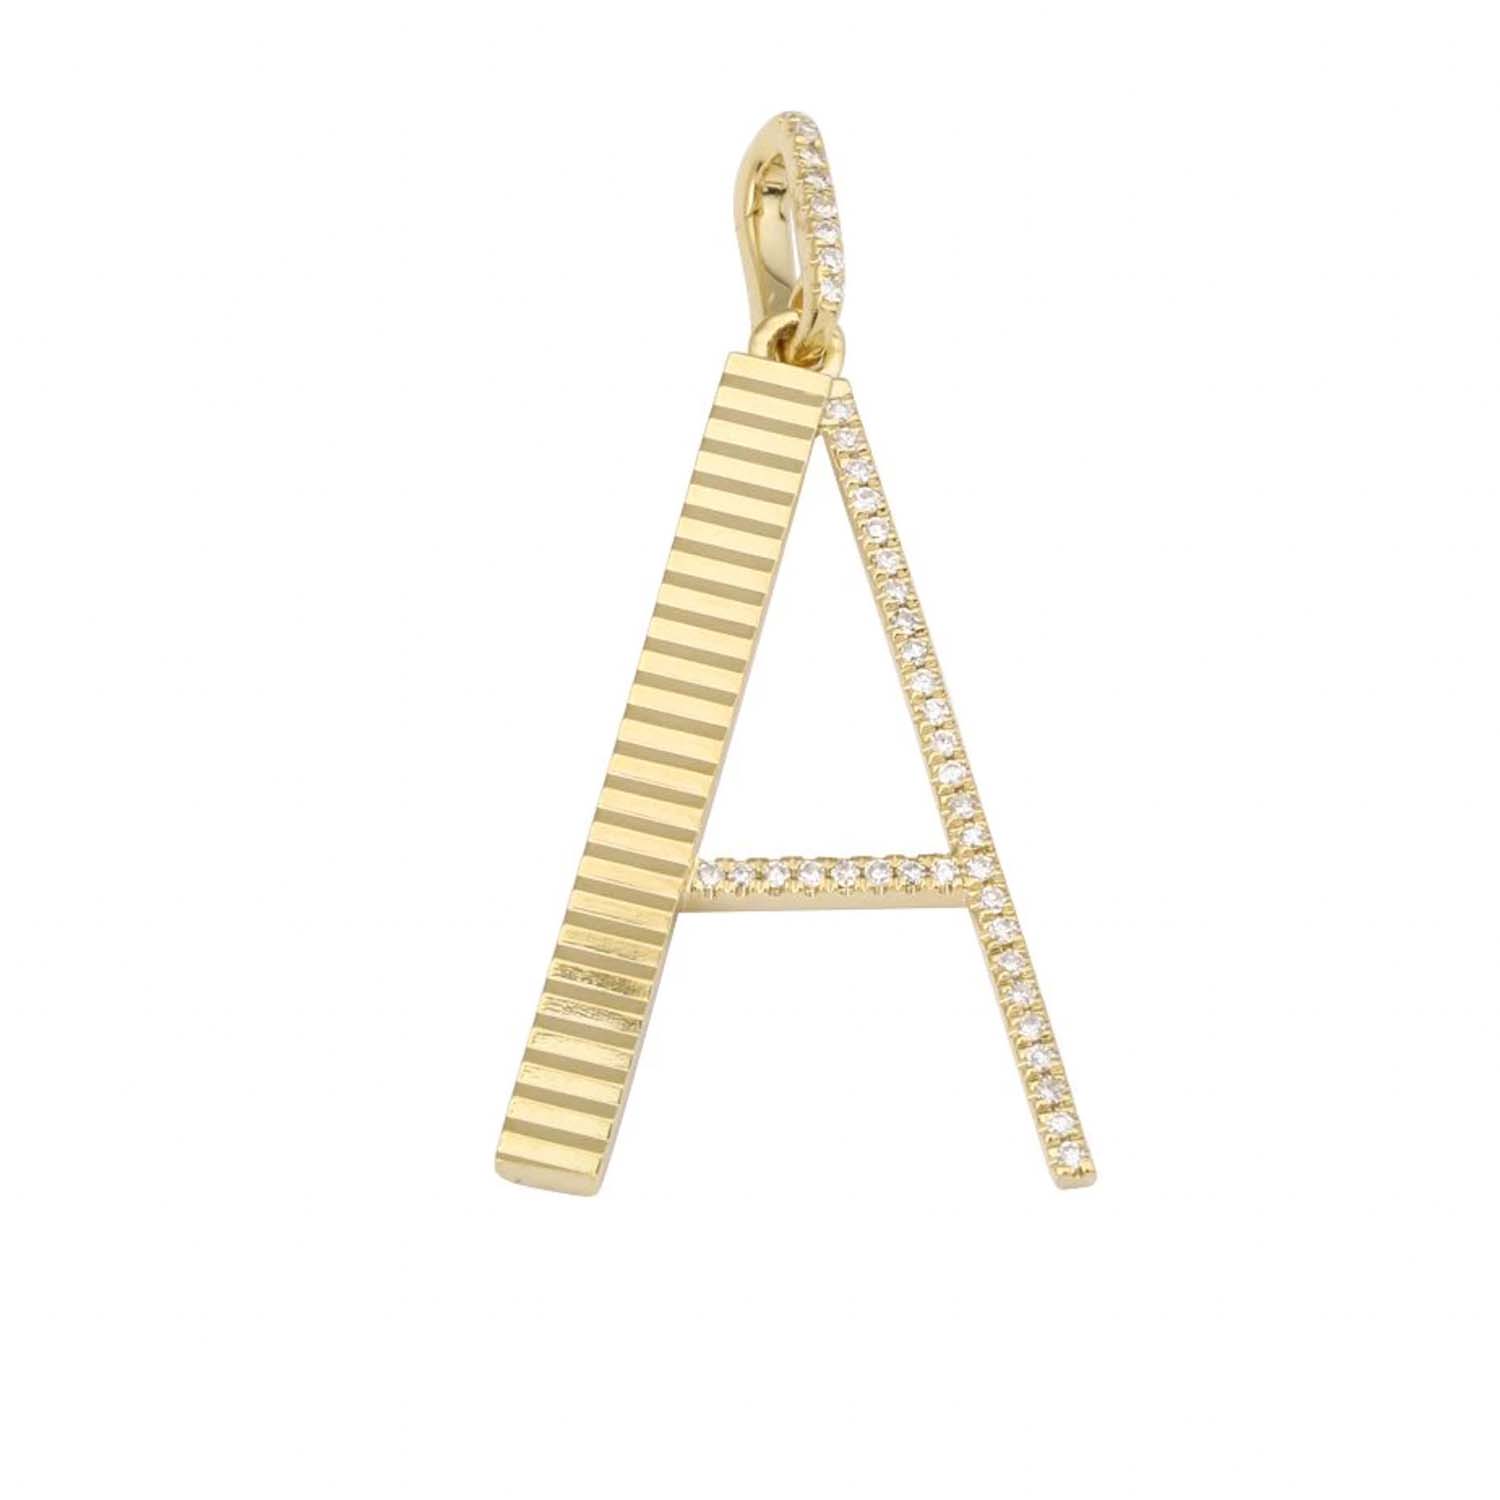 Large Retro Fluted Letter Charm